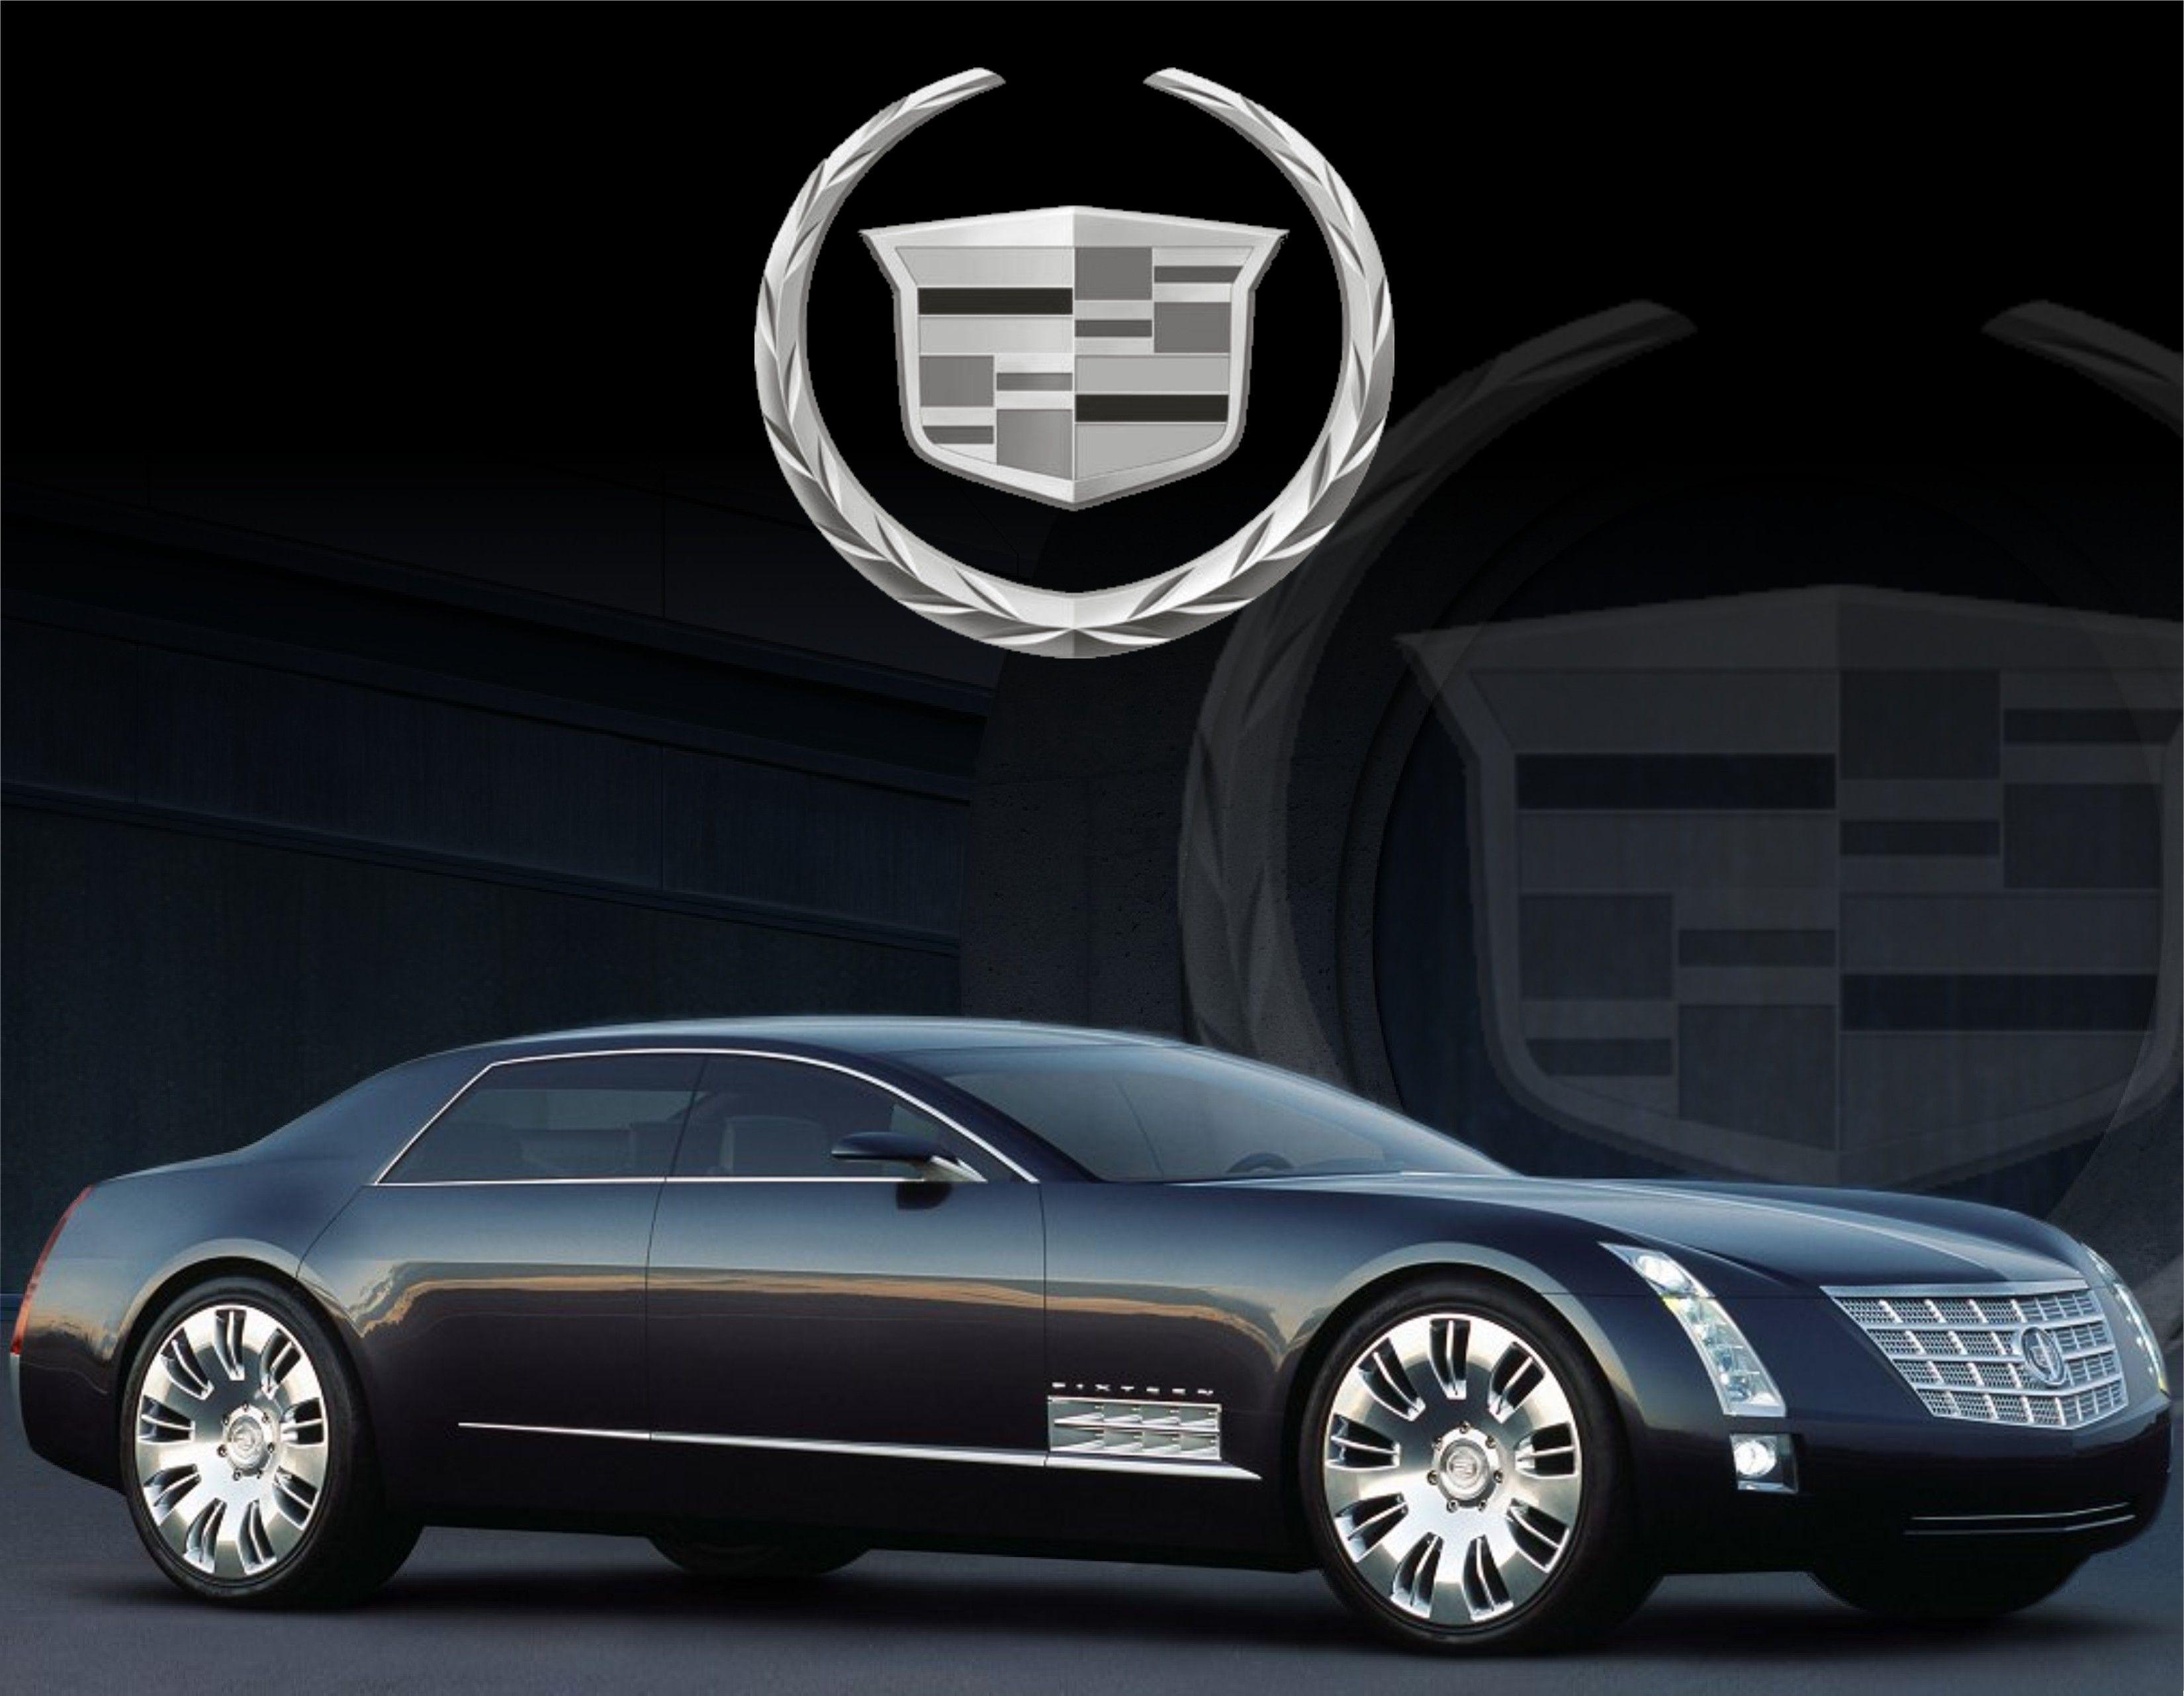 image about Cars Wallpaper. Bentley car